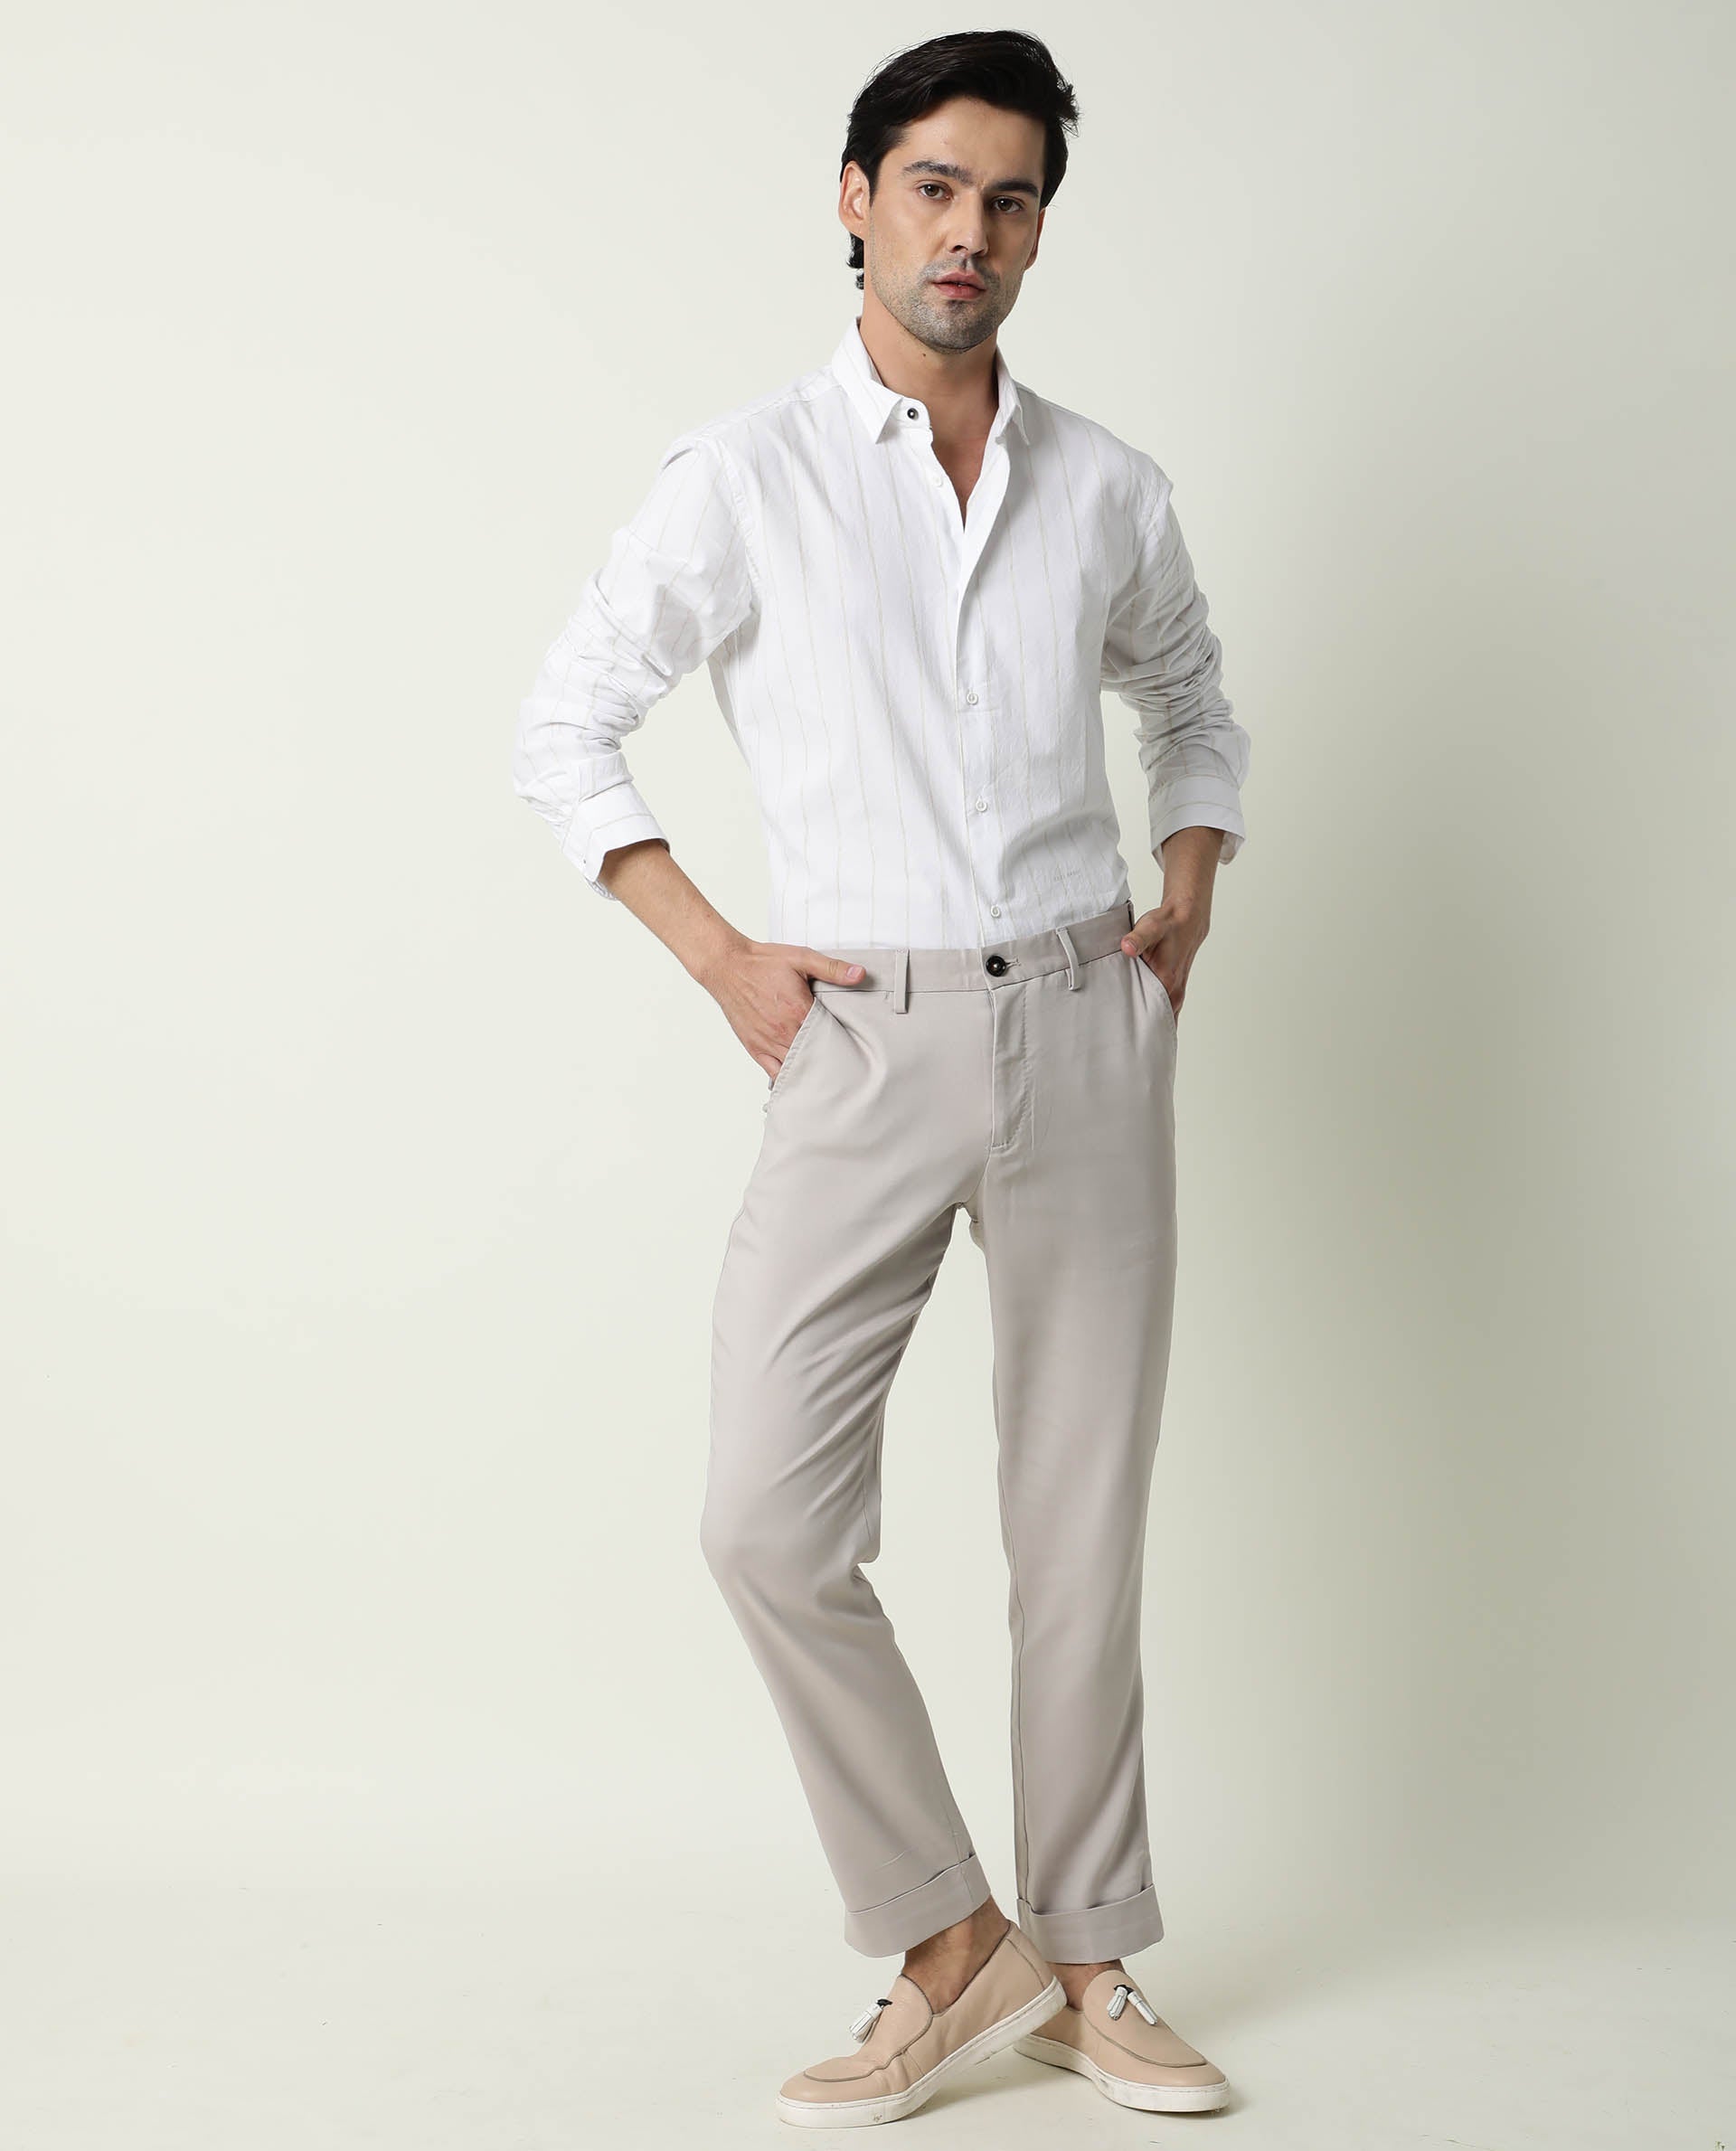 Free Photo  Man in beige shirt and pants casual wear fashion full body